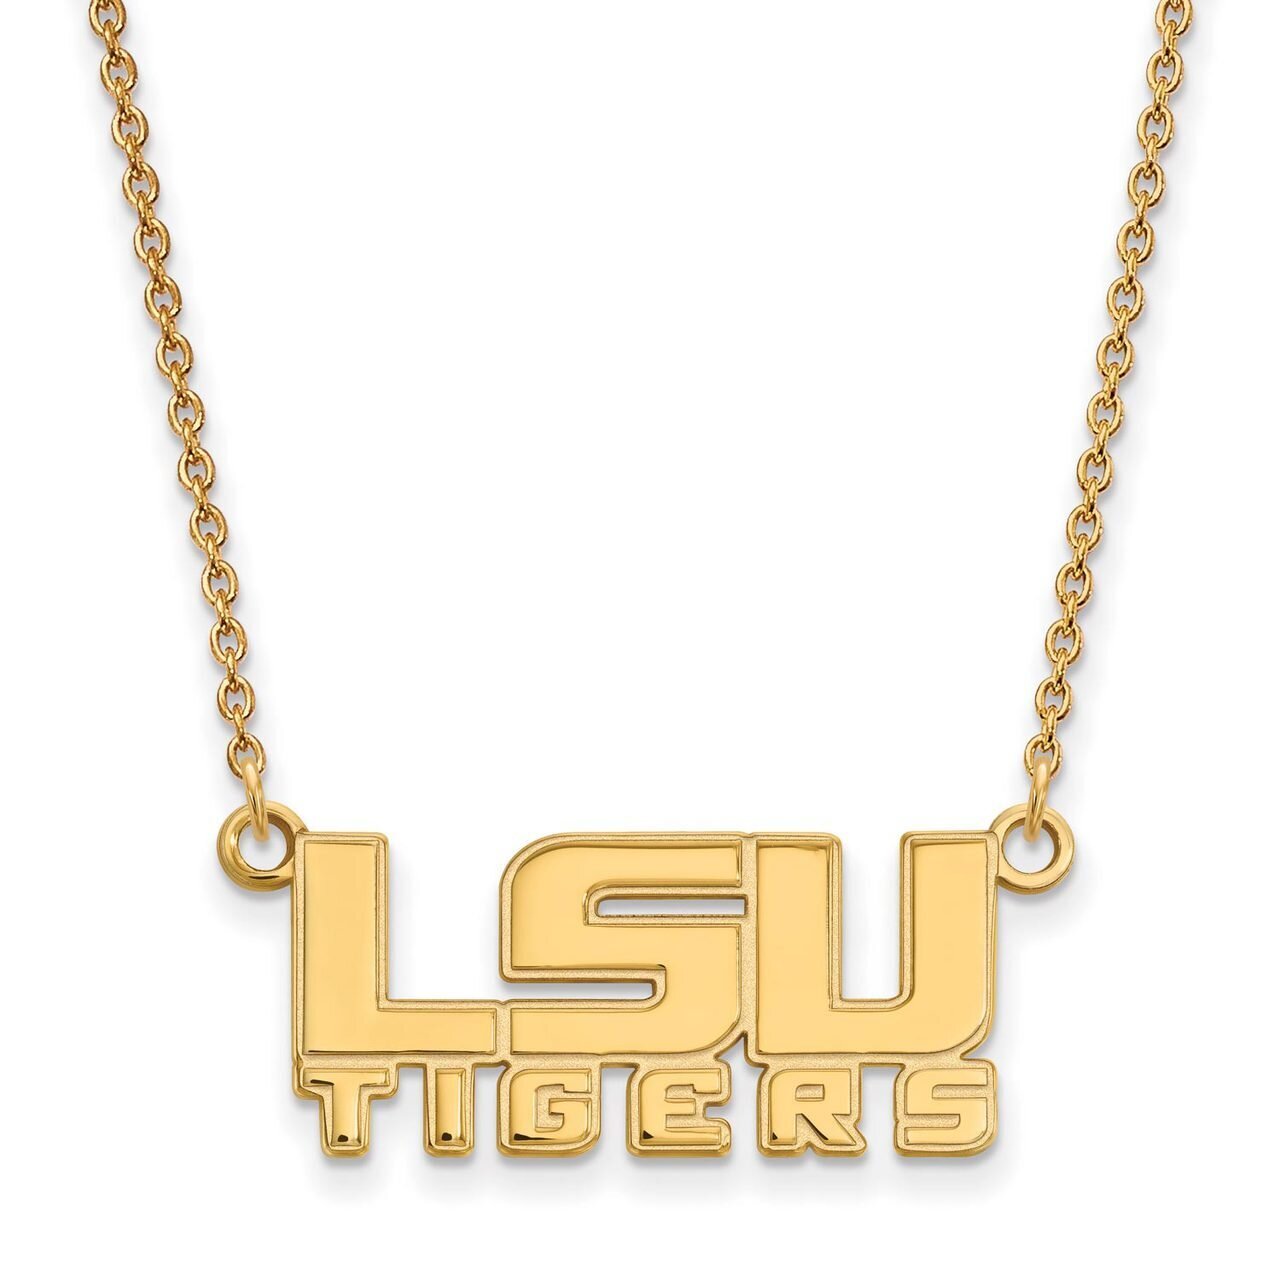 Louisiana State University Small Pendant with Chain Necklace 14k Yellow Gold 4Y047LSU-18